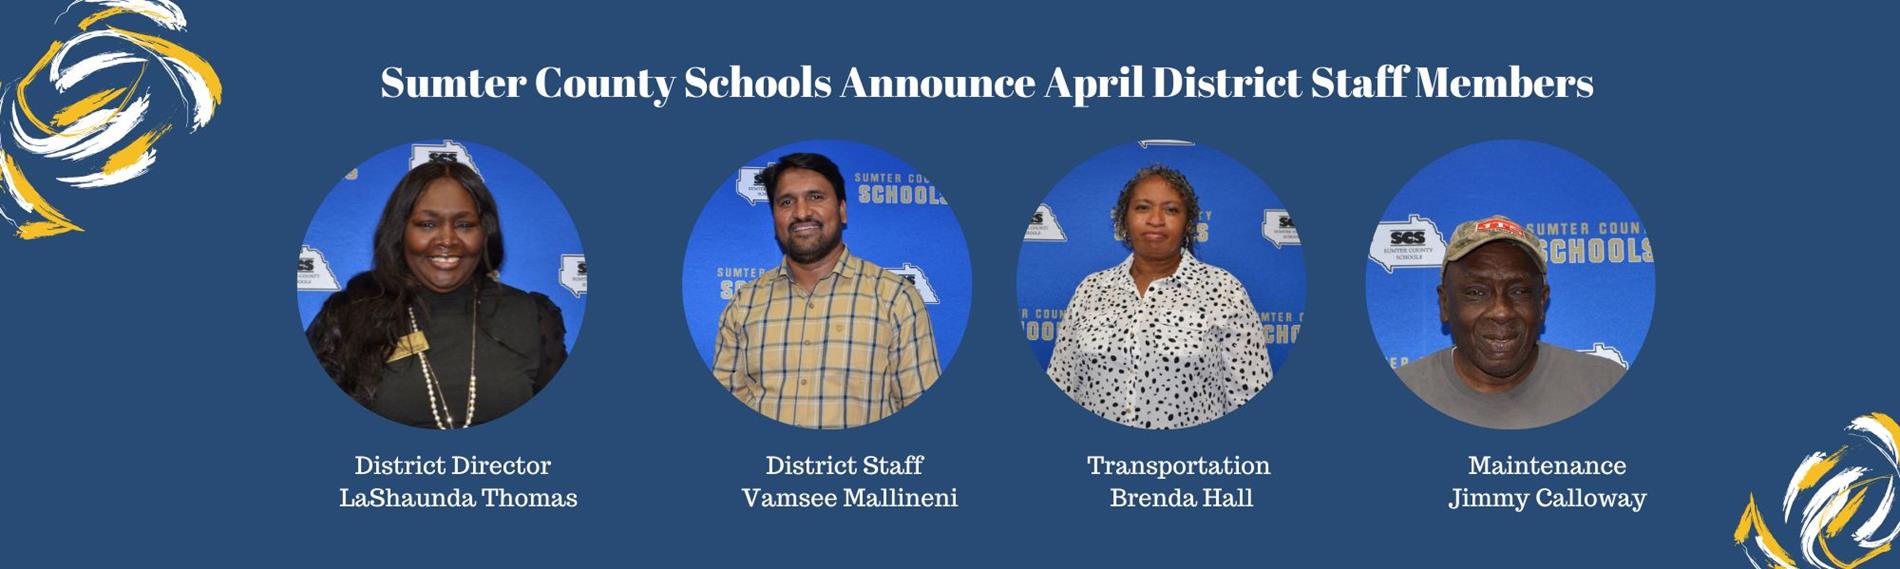 Sumter County Schools Announce April District Staff Members